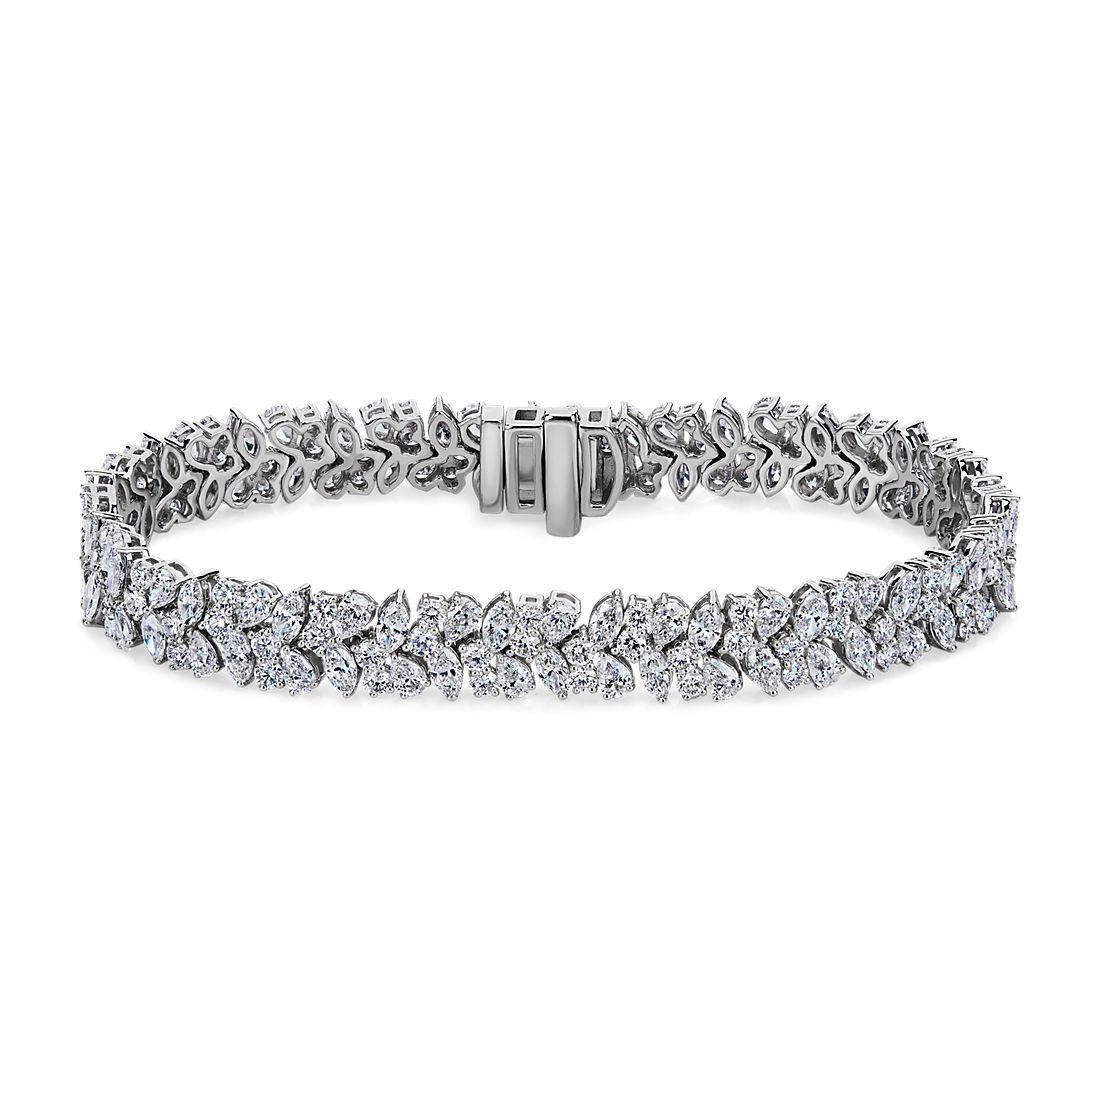 Round, Pear, and Marquise Diamond Bracelet in 14k White Gold (12.51 ct. tw.)